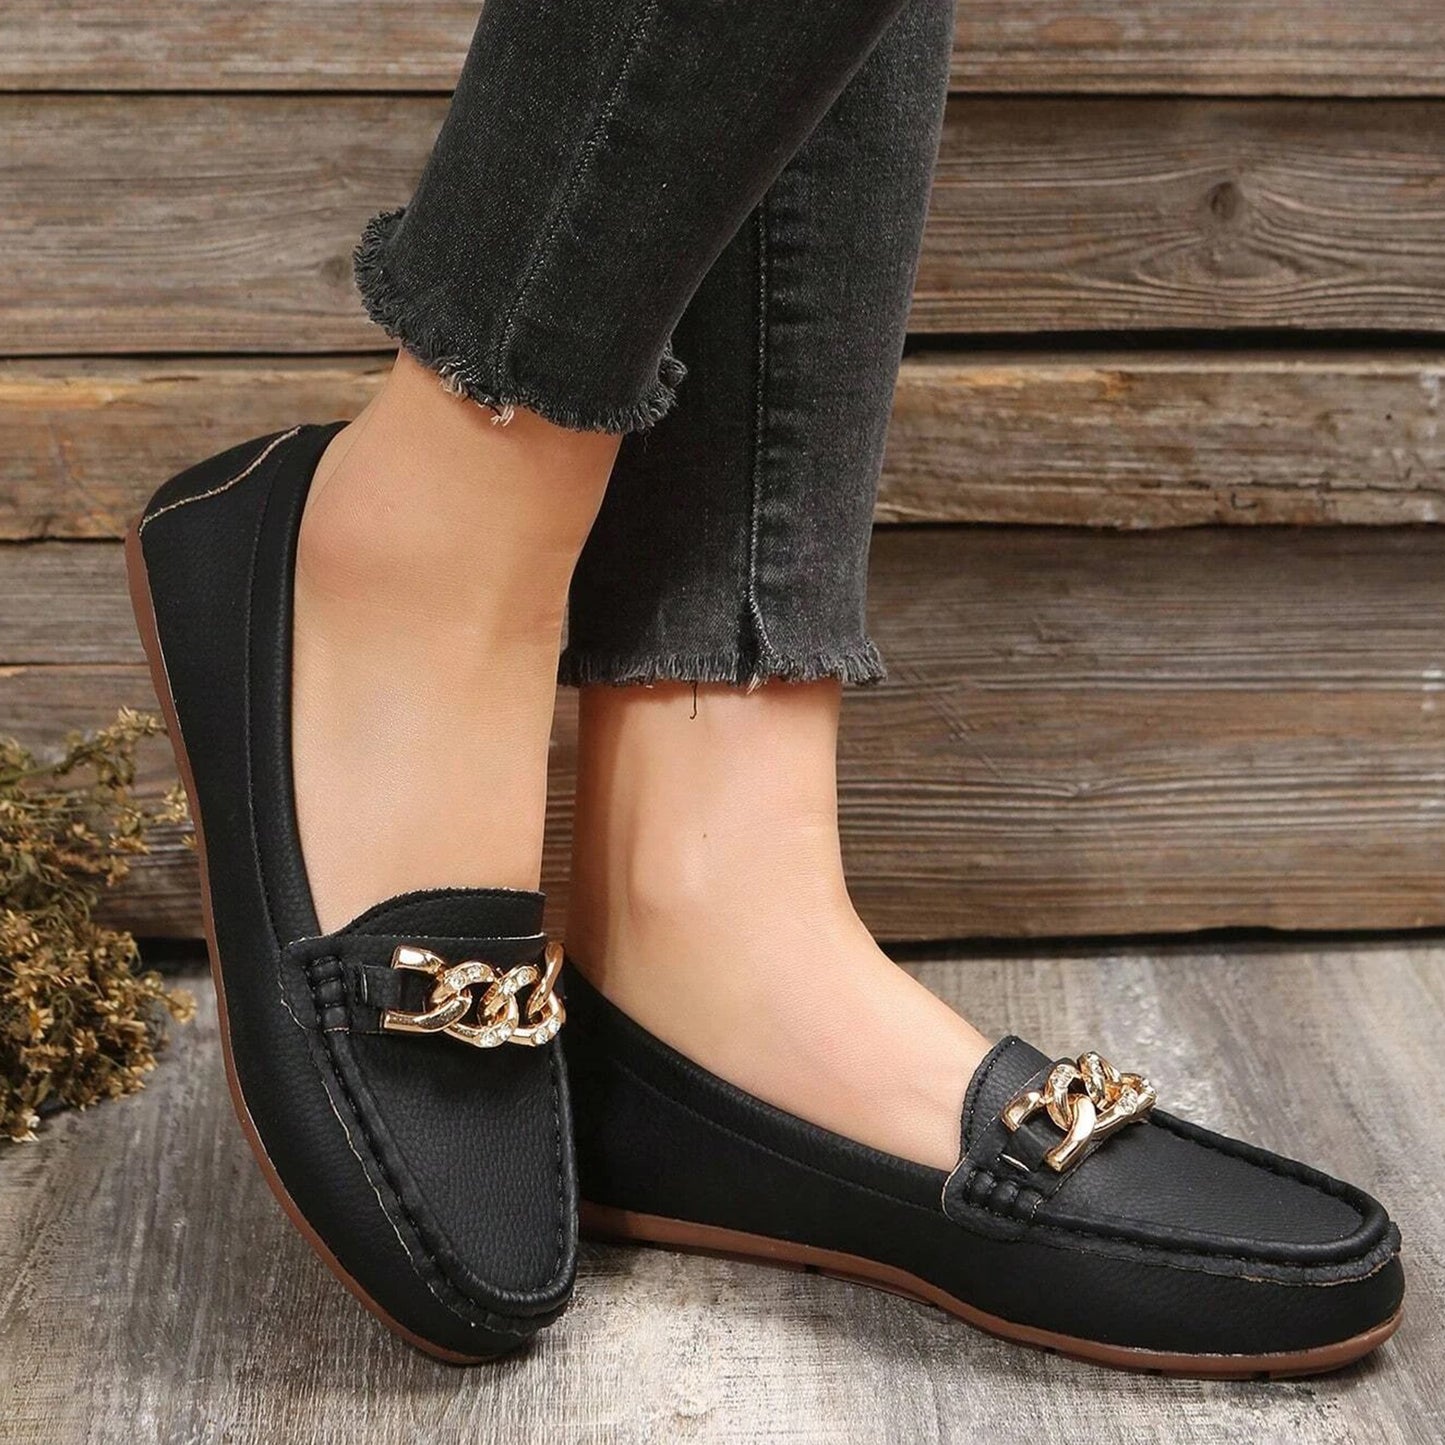 Genuine Leather Medicated Loafers For Women CB